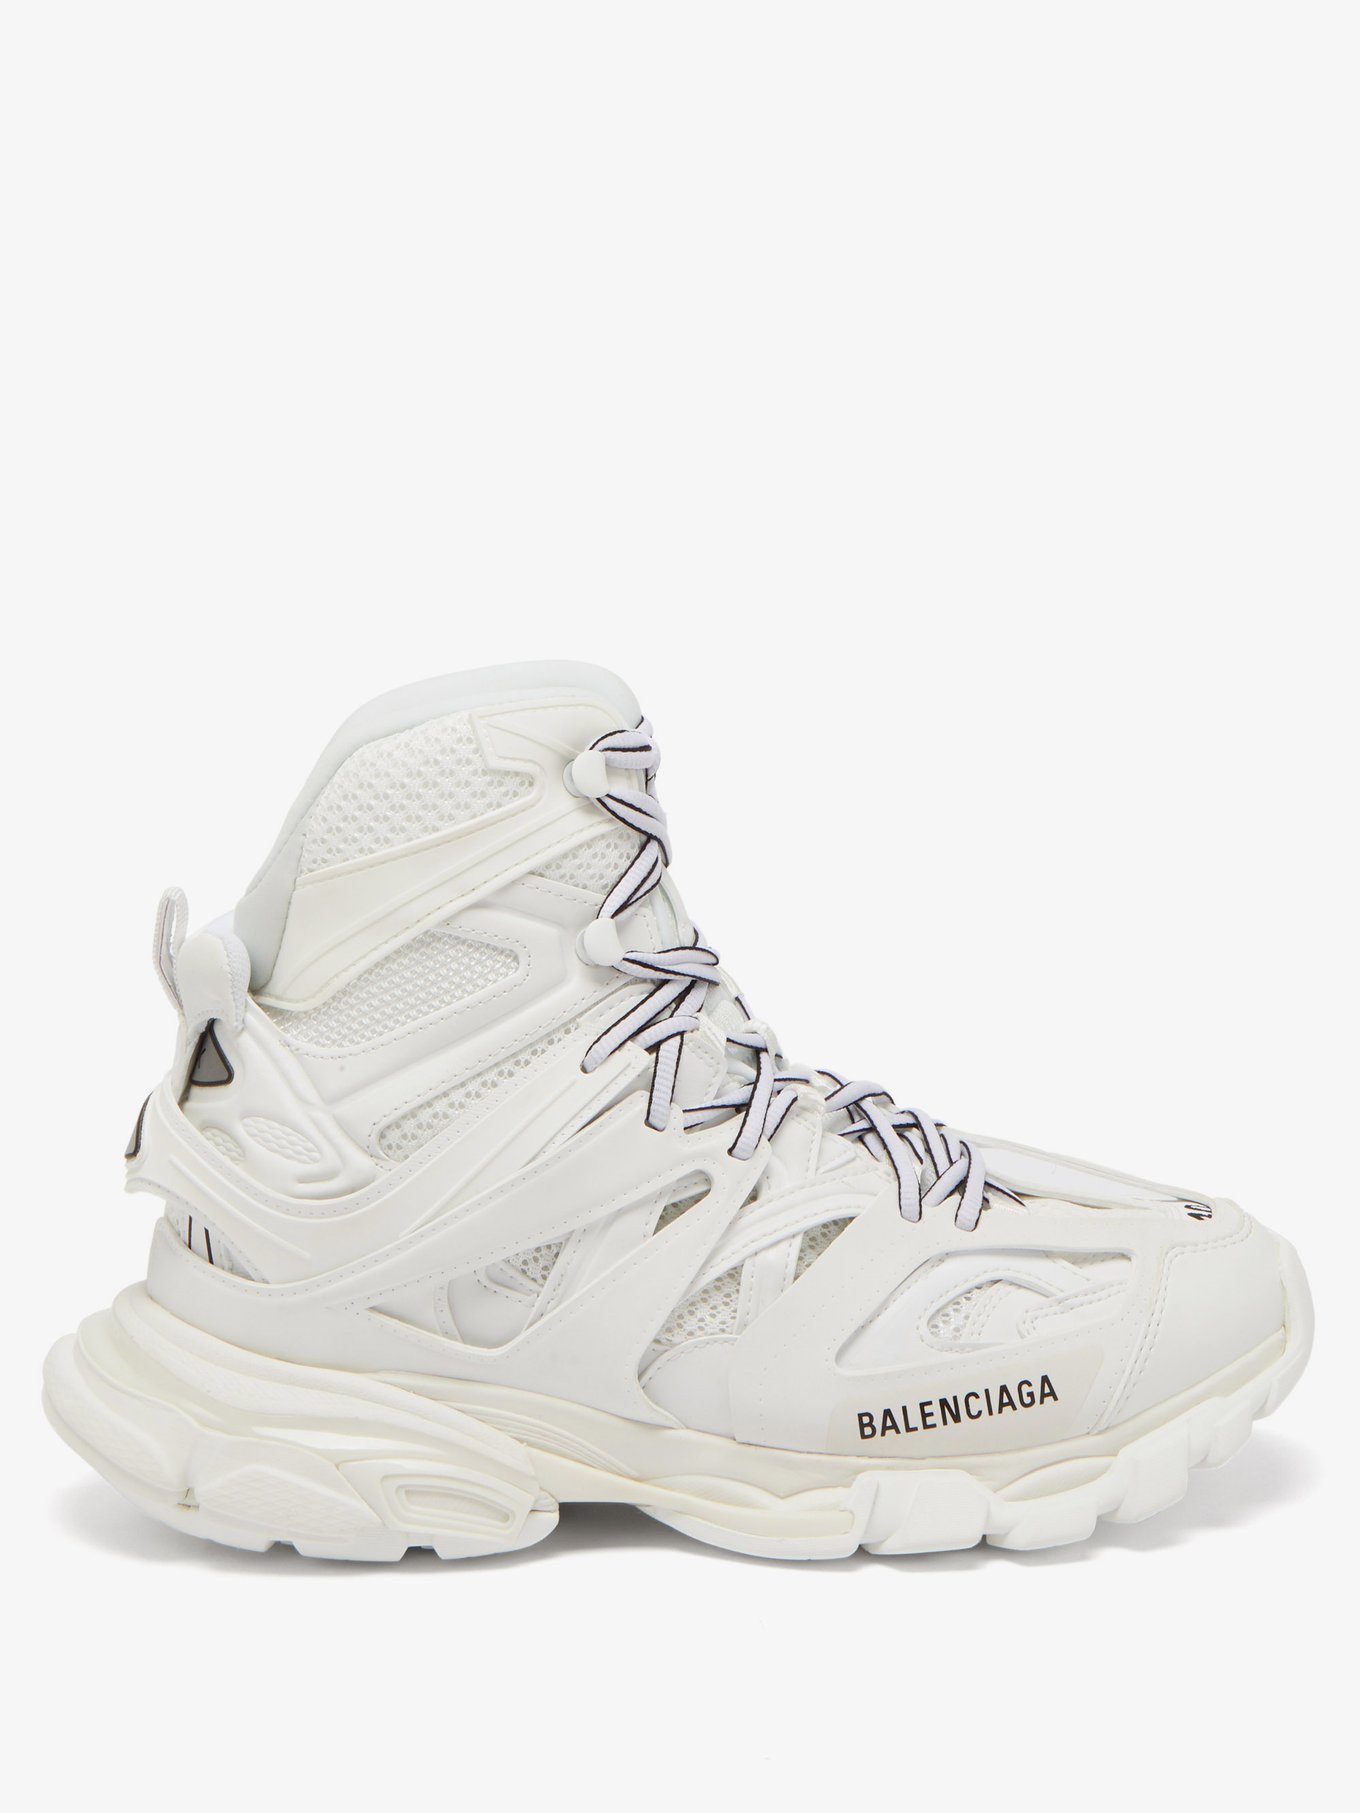 Balenciaga Monochrome Perforated HighTop Trainers in White  Lyst